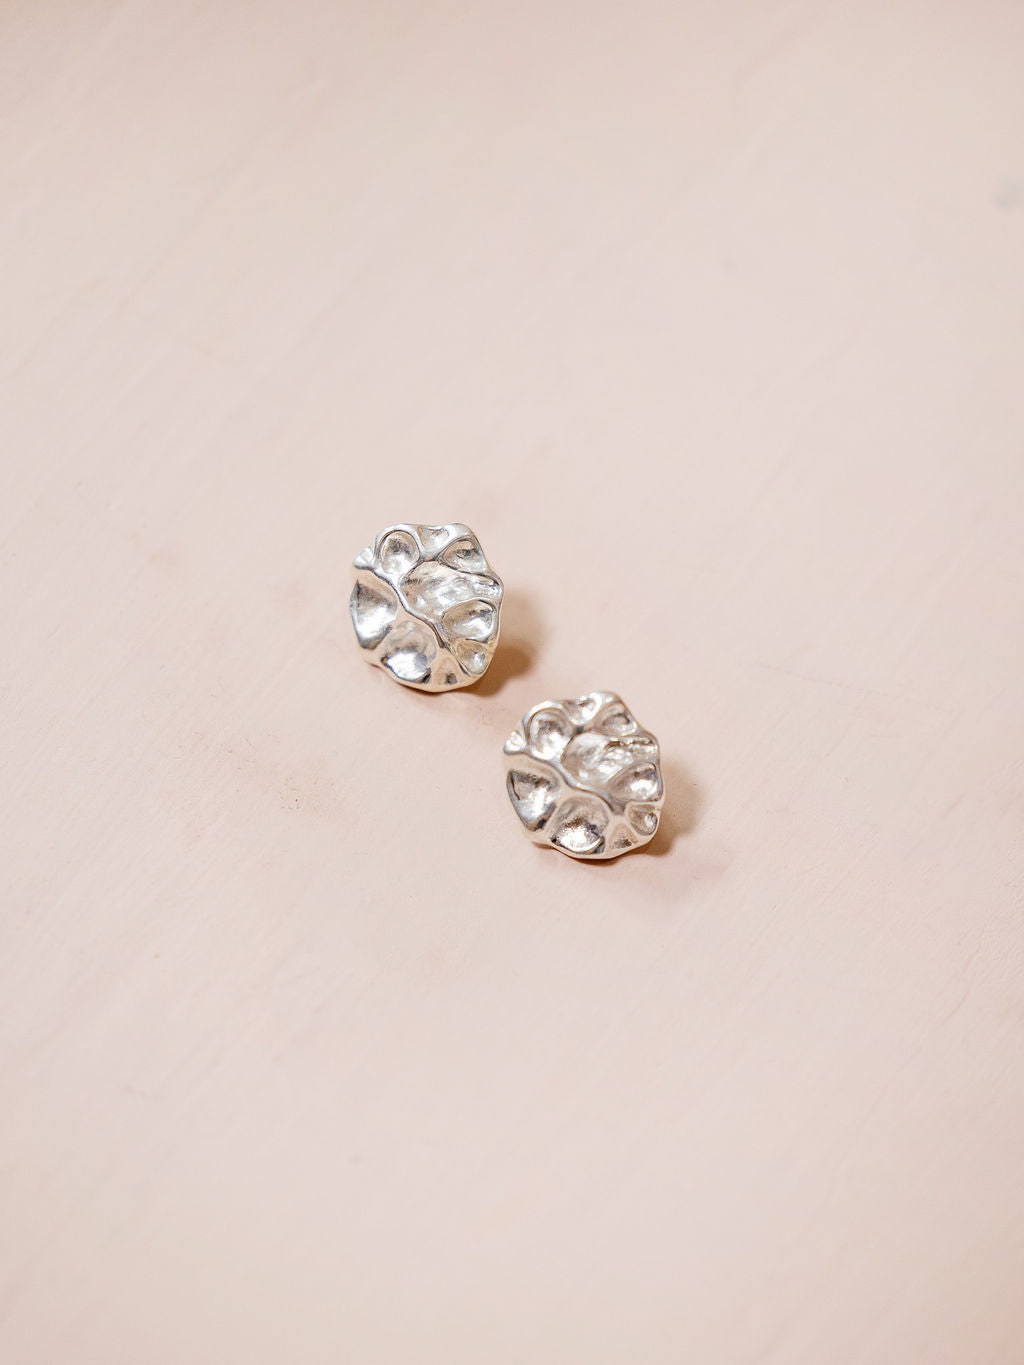 Small textured silver earrings against pink background